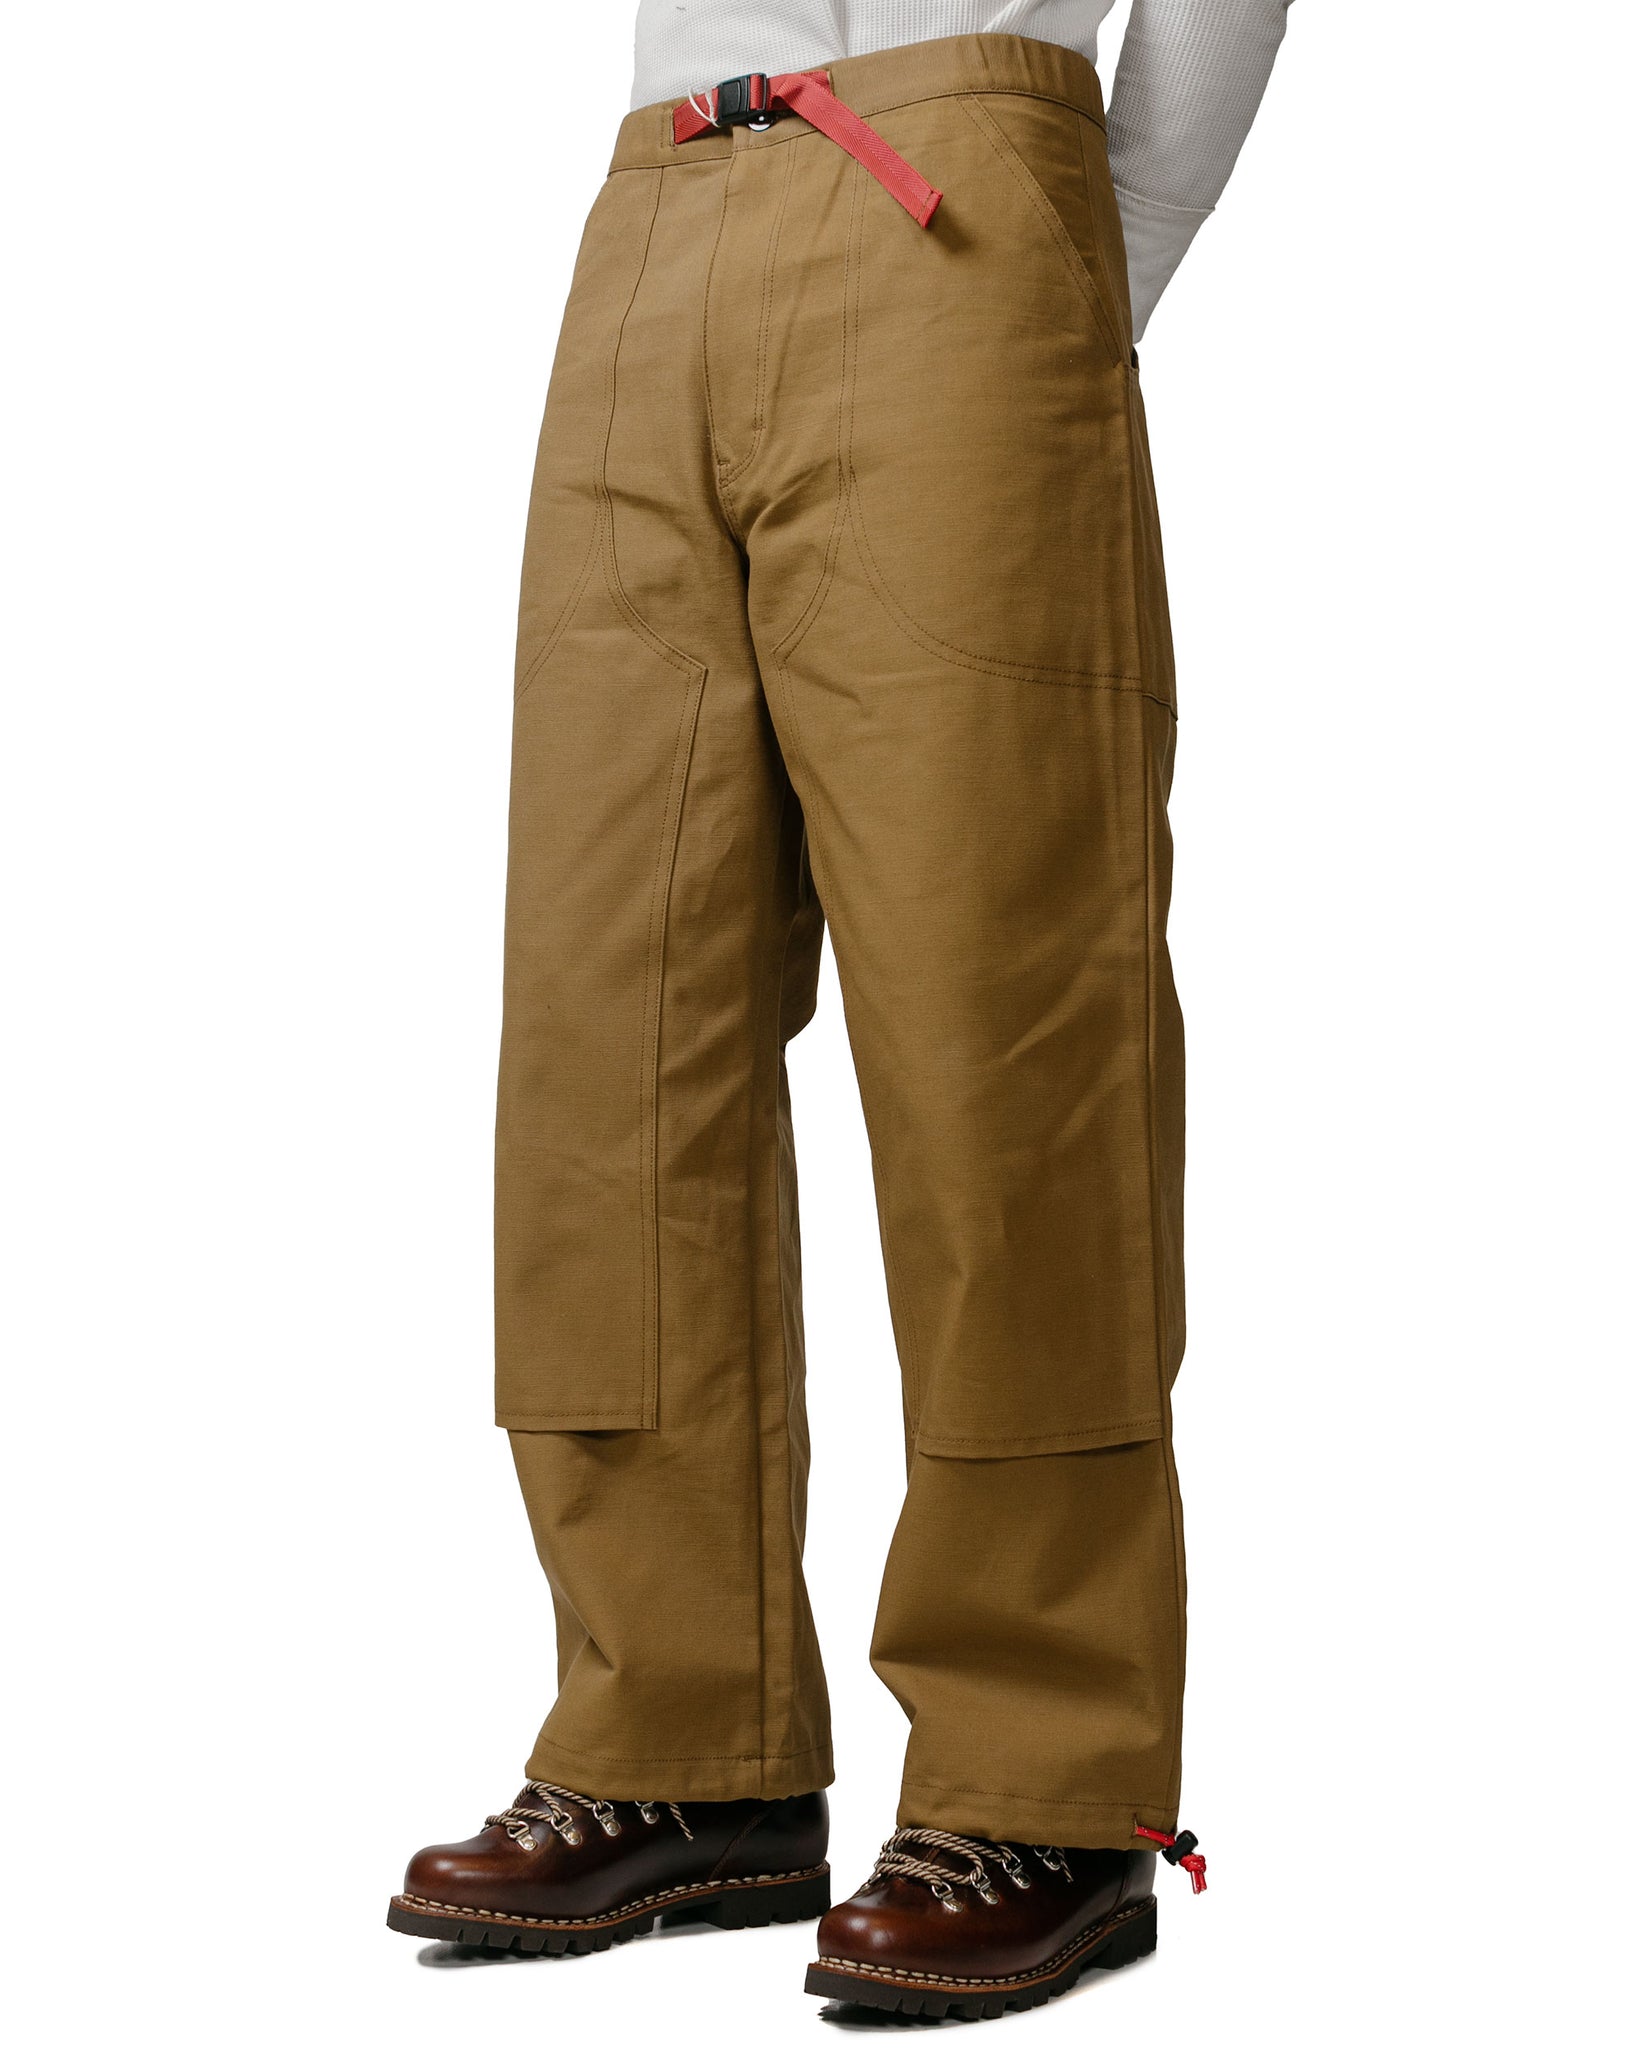 The Real McCoy's MP23104 Cotton Duck Climber's Pants Brown model front